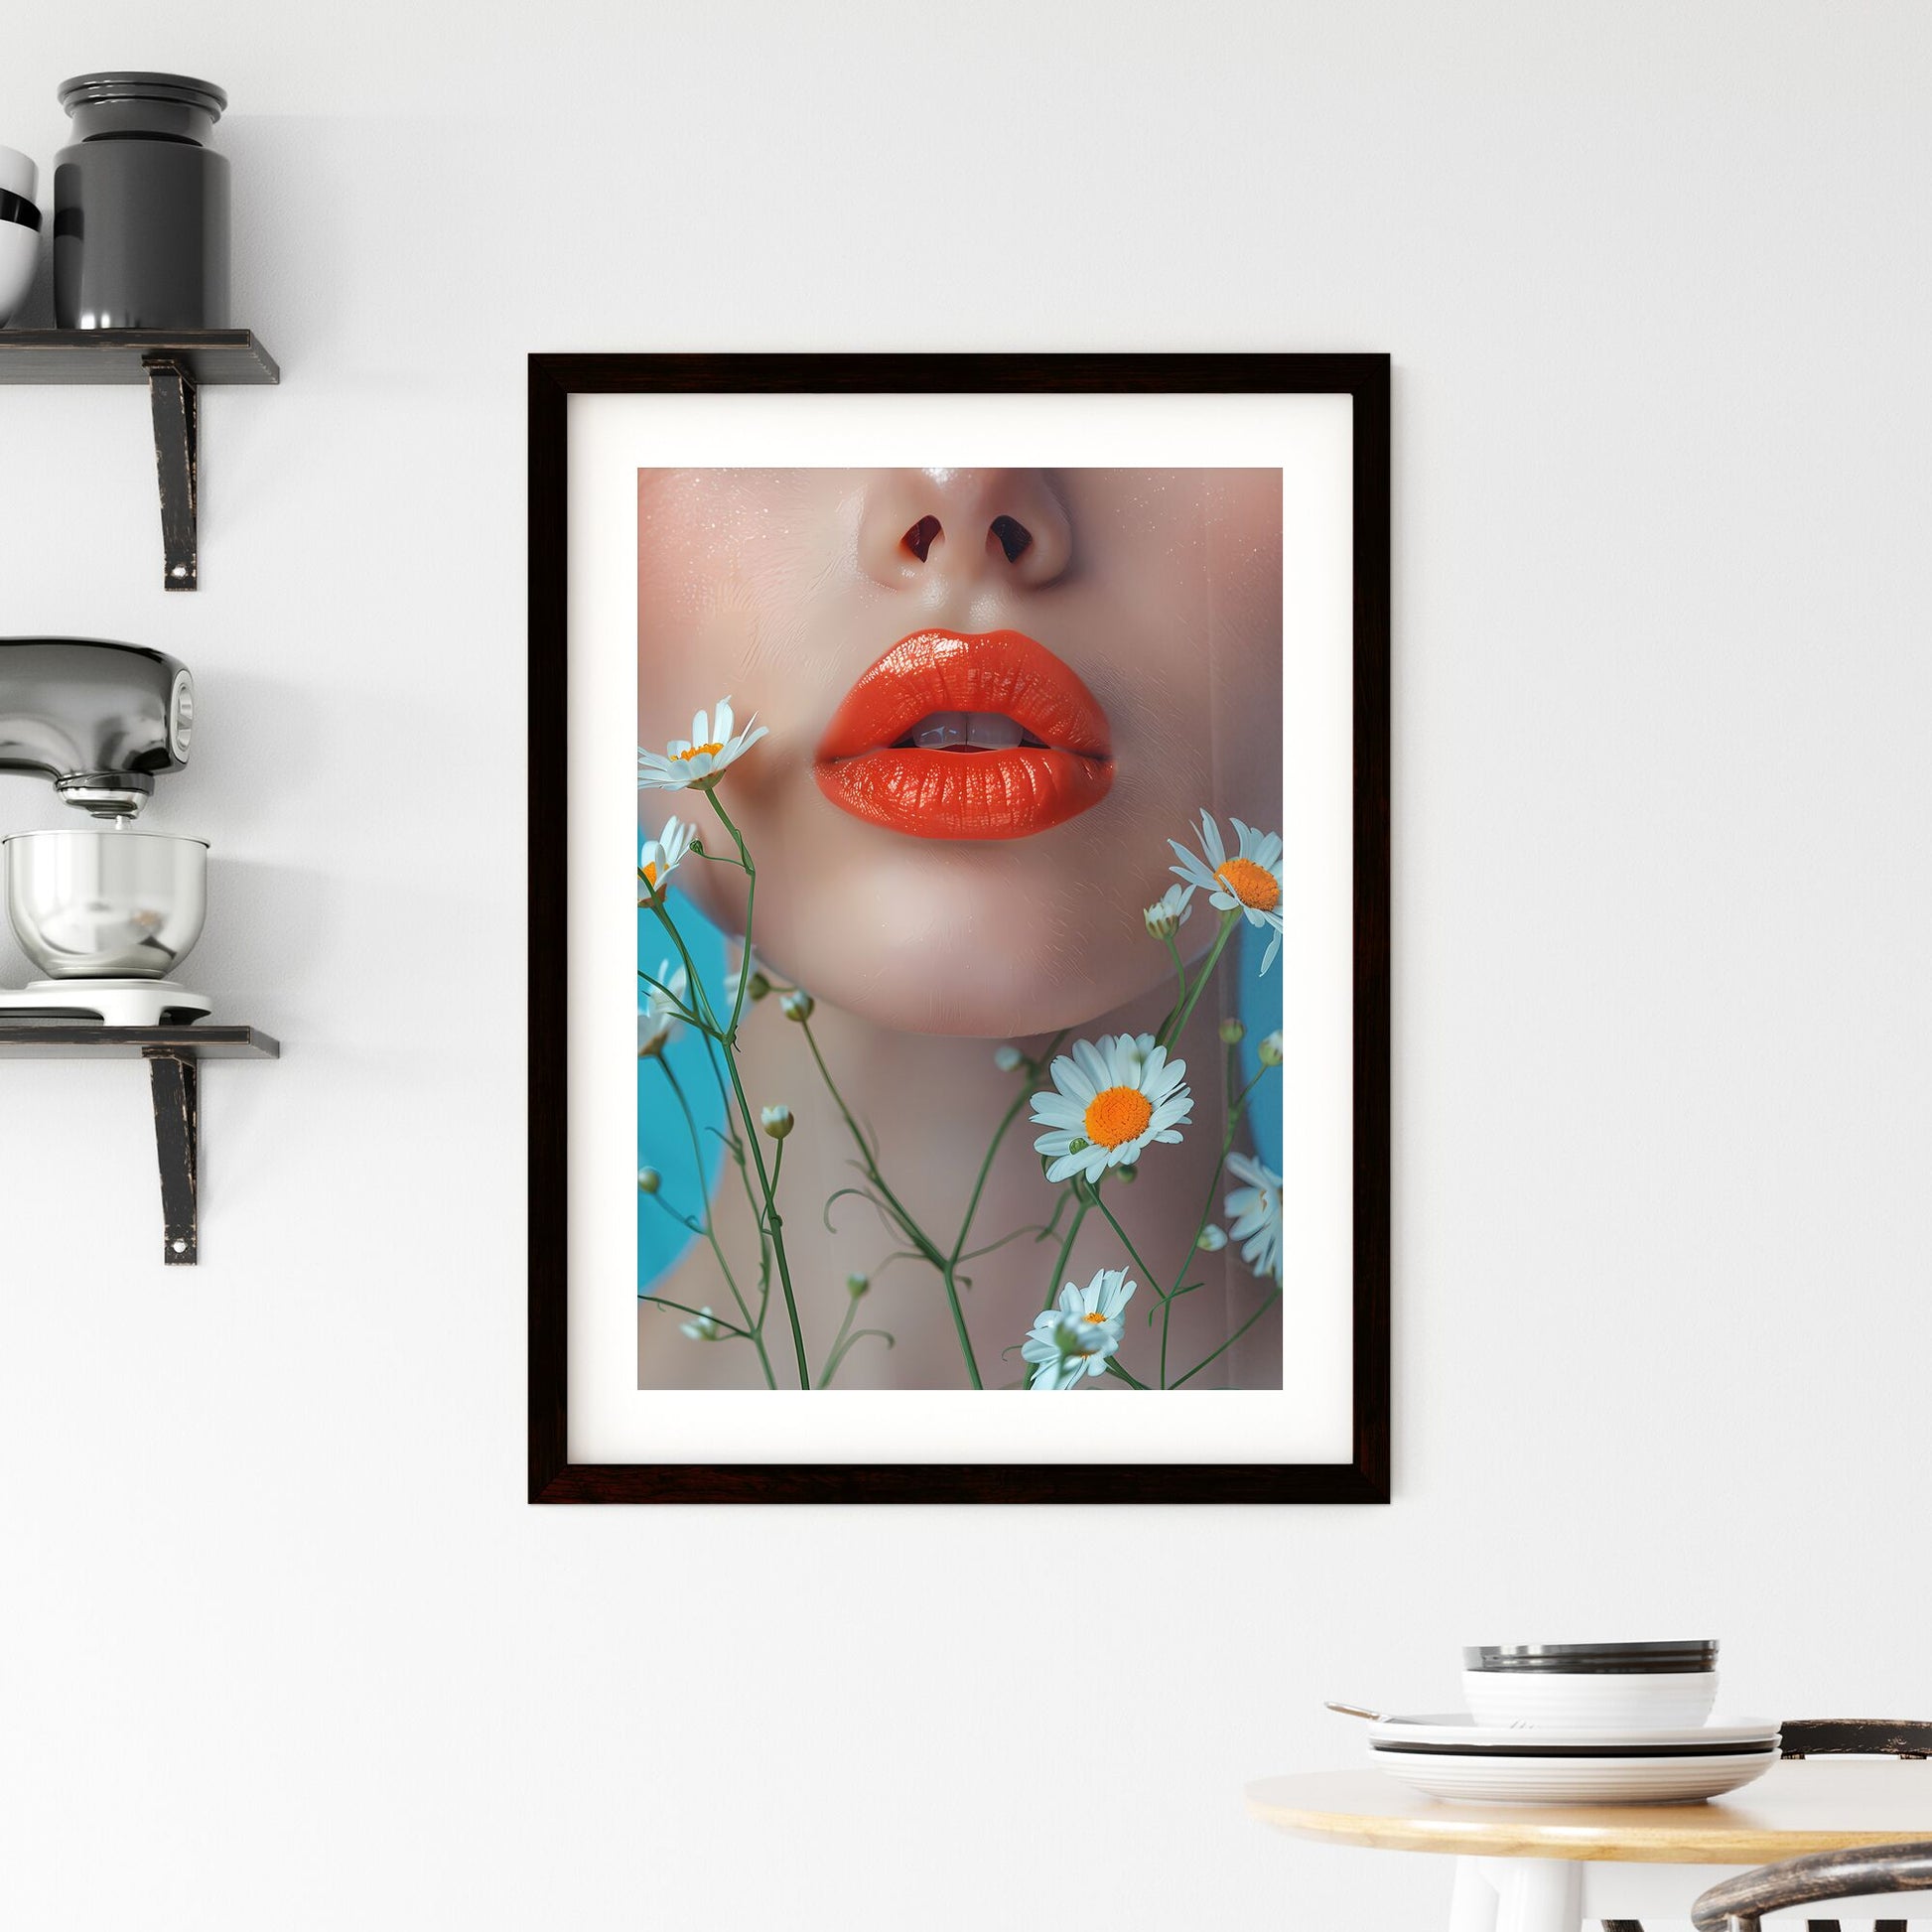 Artistic Floral Beauty: Lush Lips of a Girl Against a Blue Background, Blooming with White Flowers Default Title